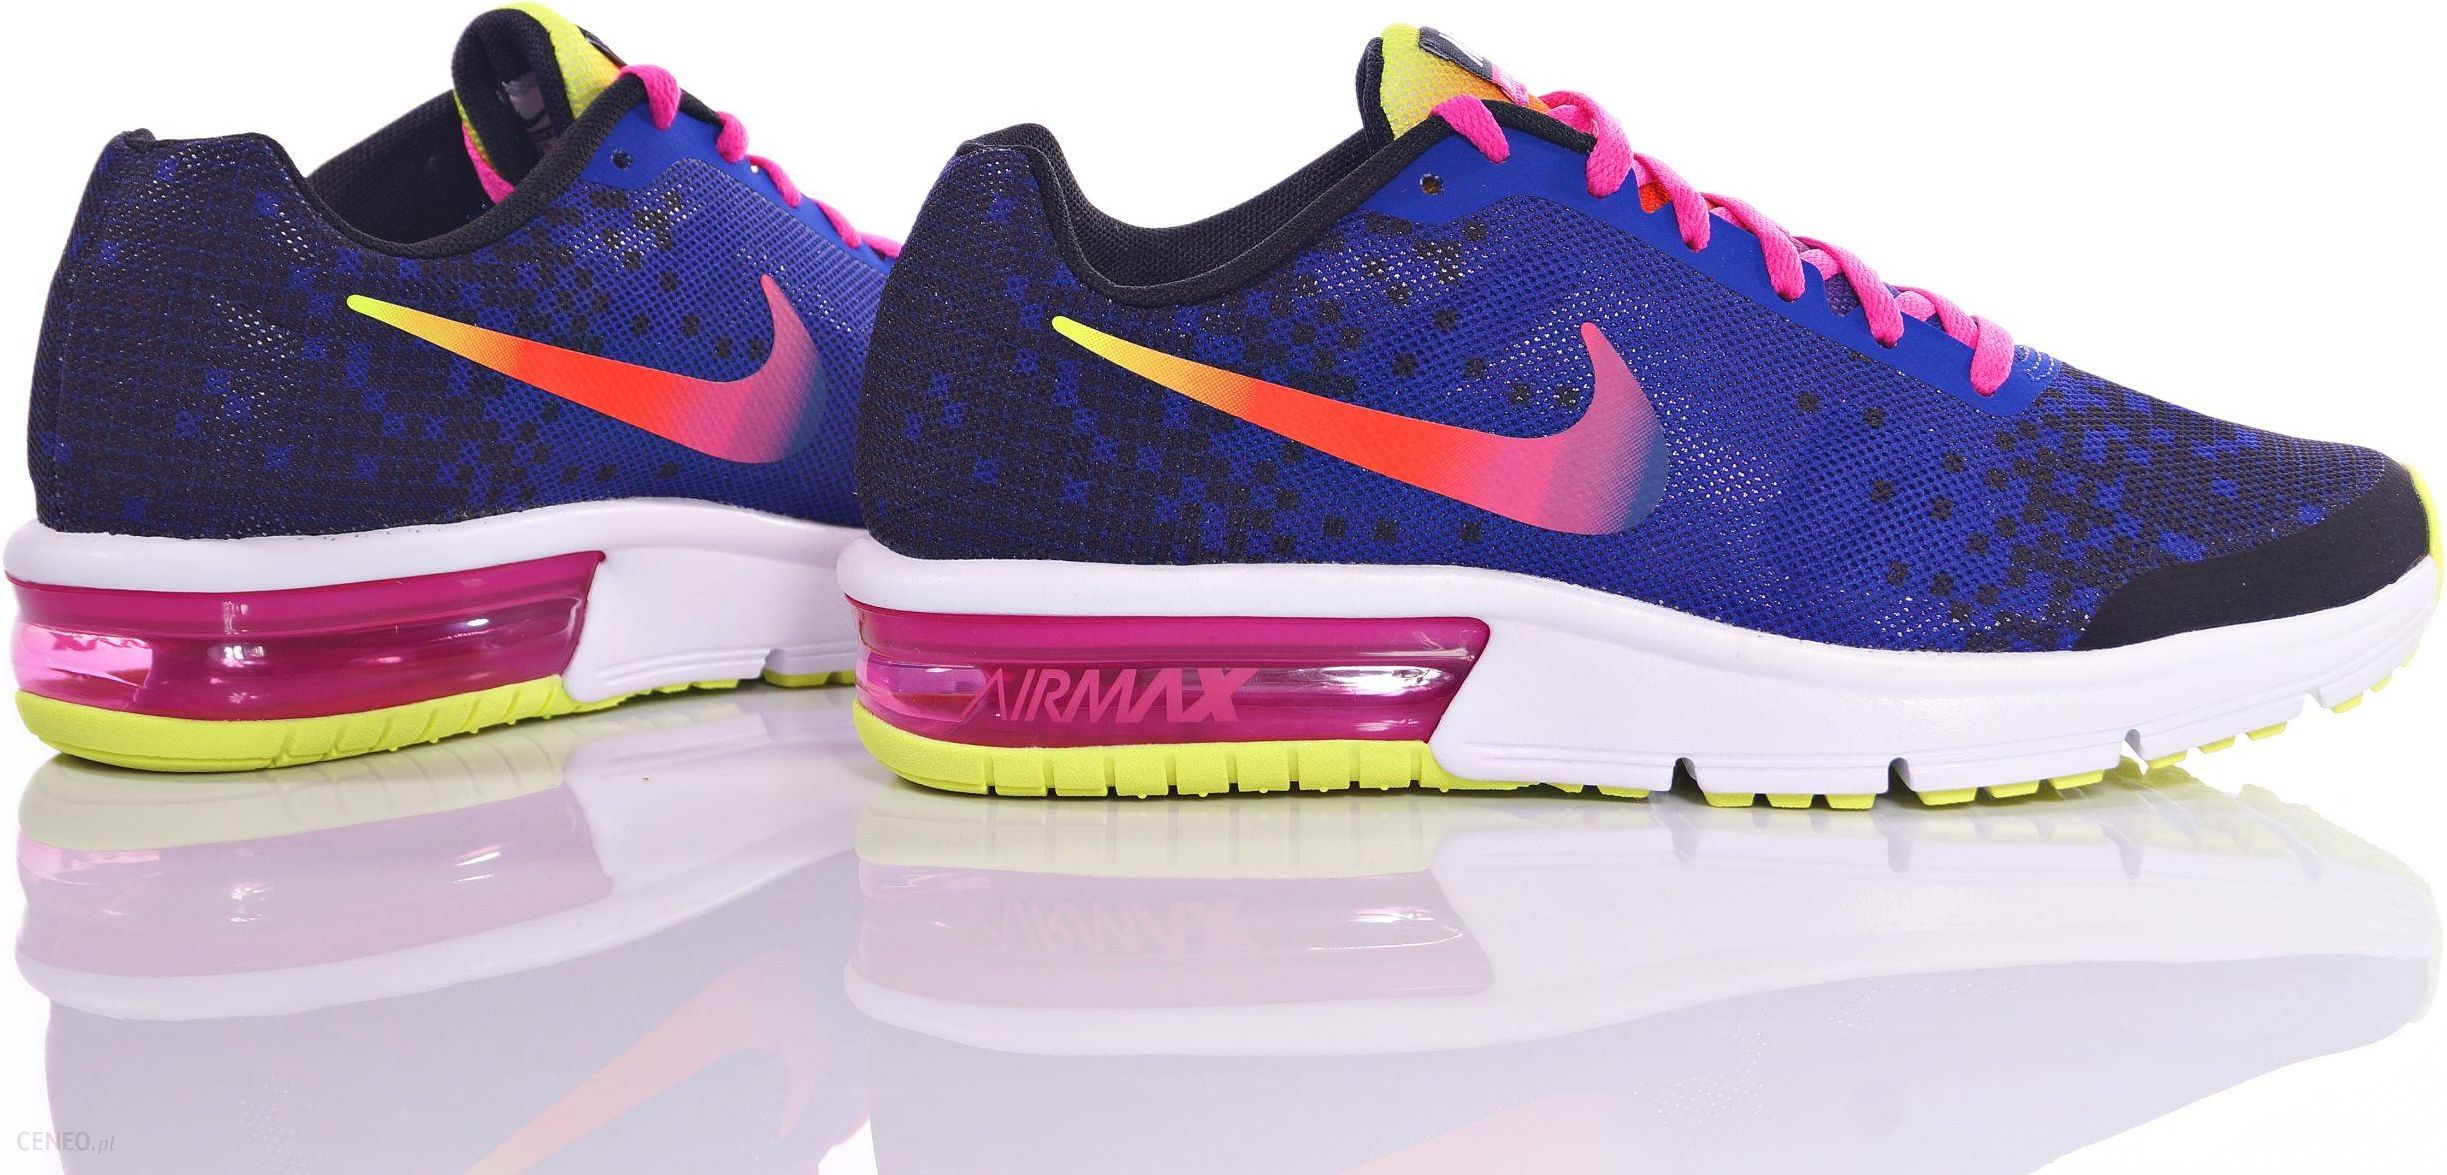 OBUWIE NIKE AIR MAX SEQUENT PRINT (GS) 820330-005) - i opinie - Ceneo.pl